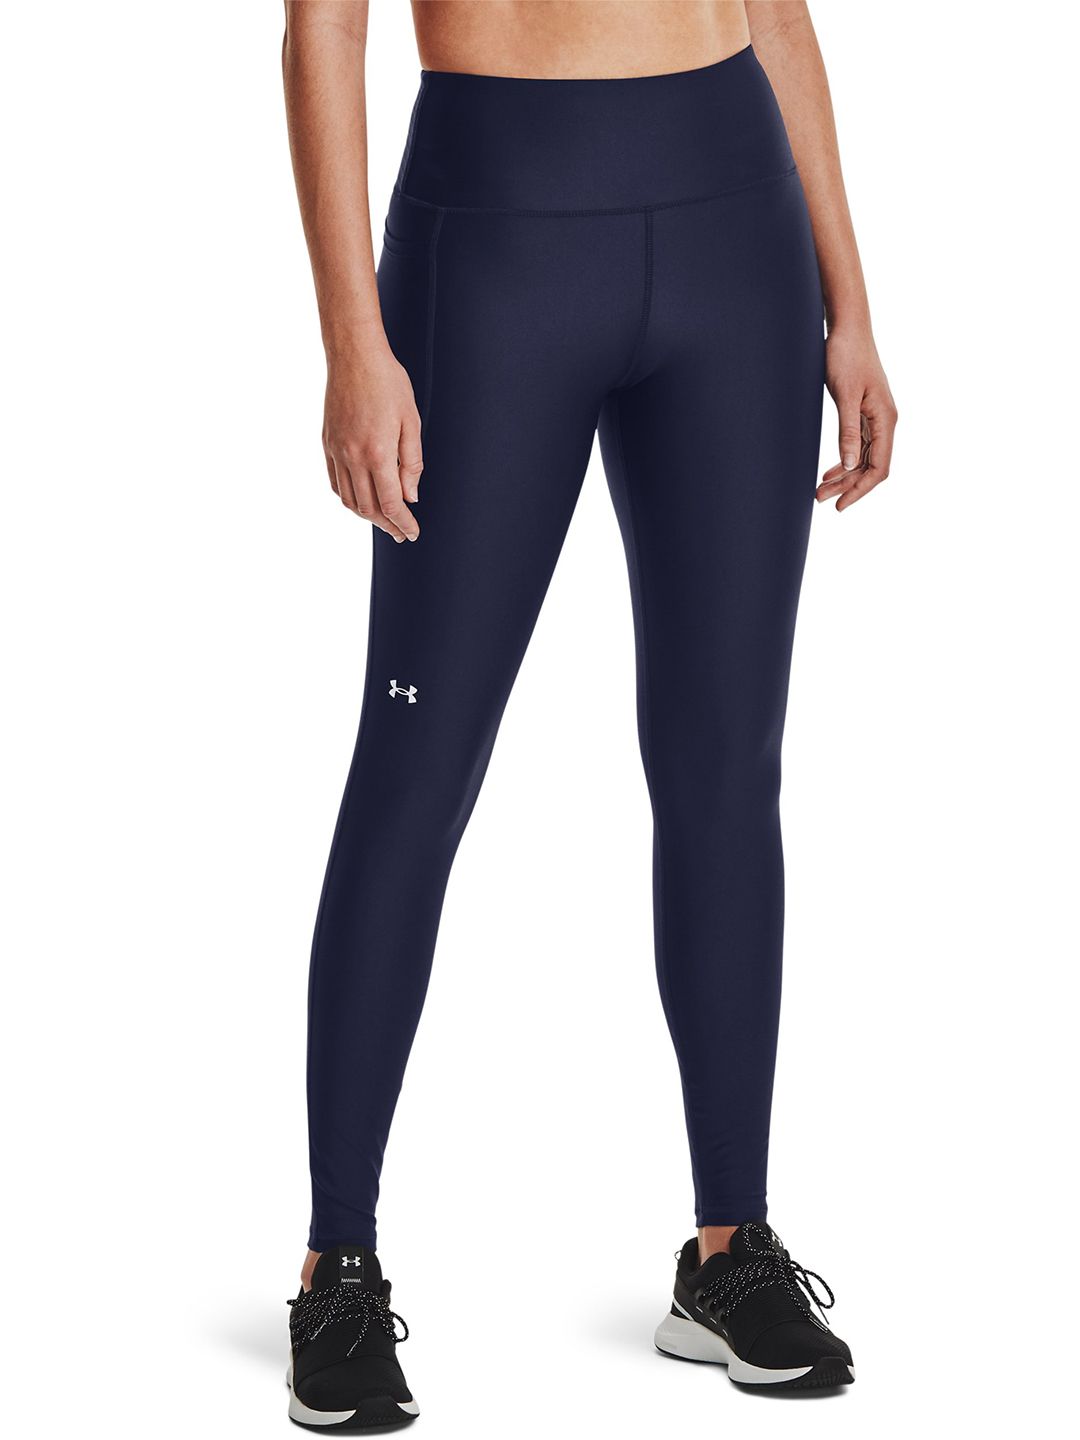 UNDER ARMOUR Women Navy Blue Heat Gear High-Rise No-Slip Waistband Full-Length Tights Price in India